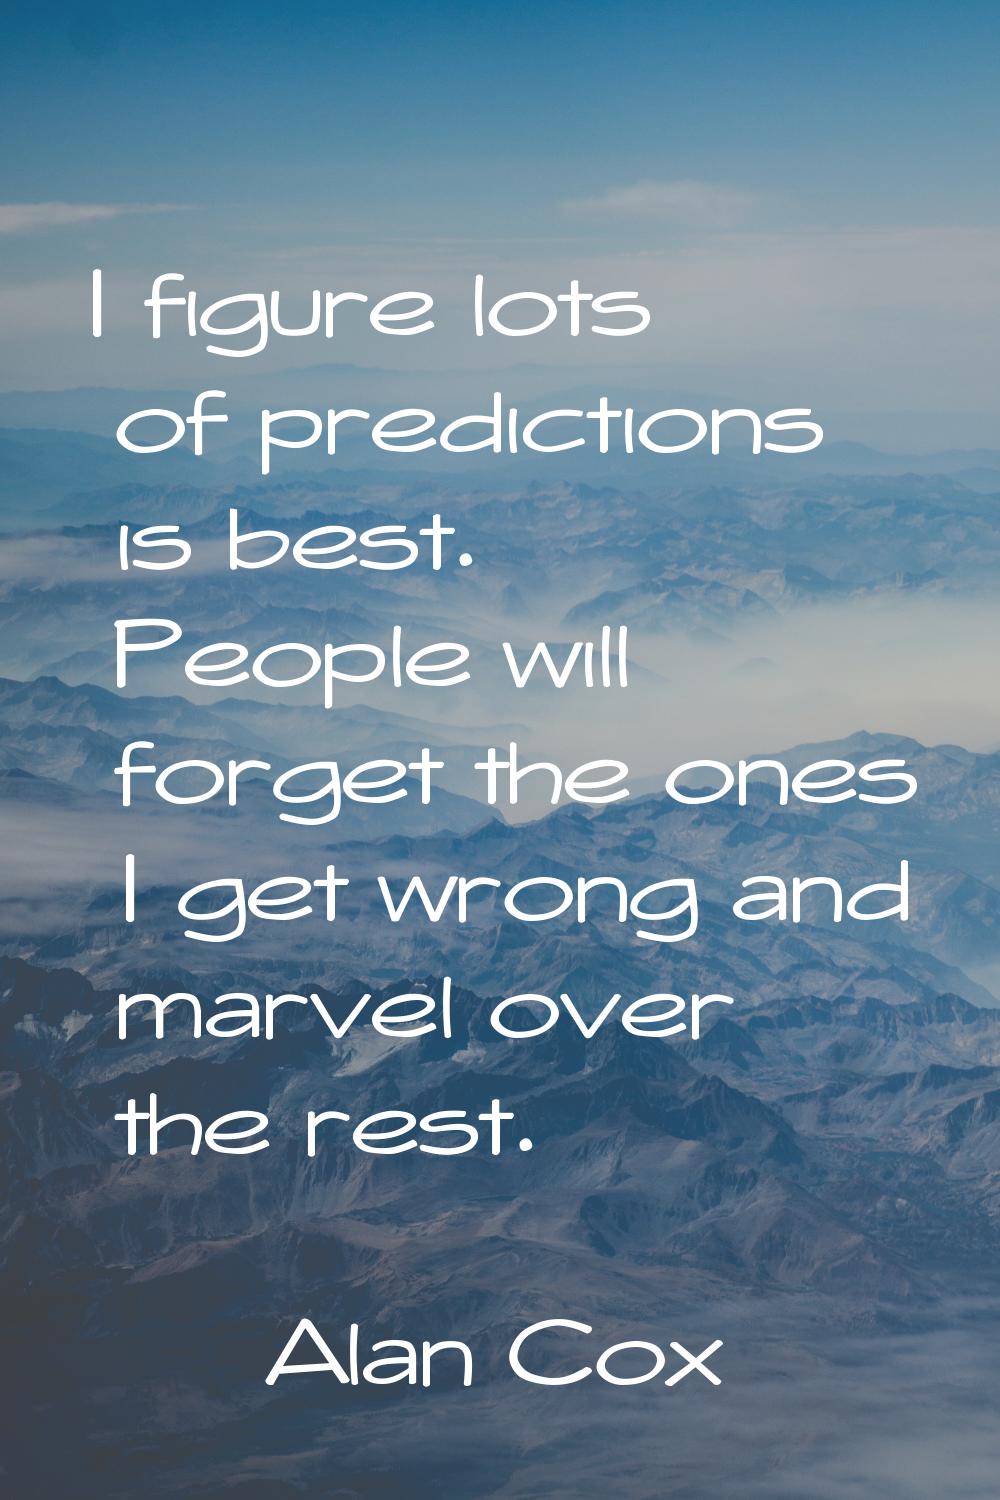 I figure lots of predictions is best. People will forget the ones I get wrong and marvel over the r